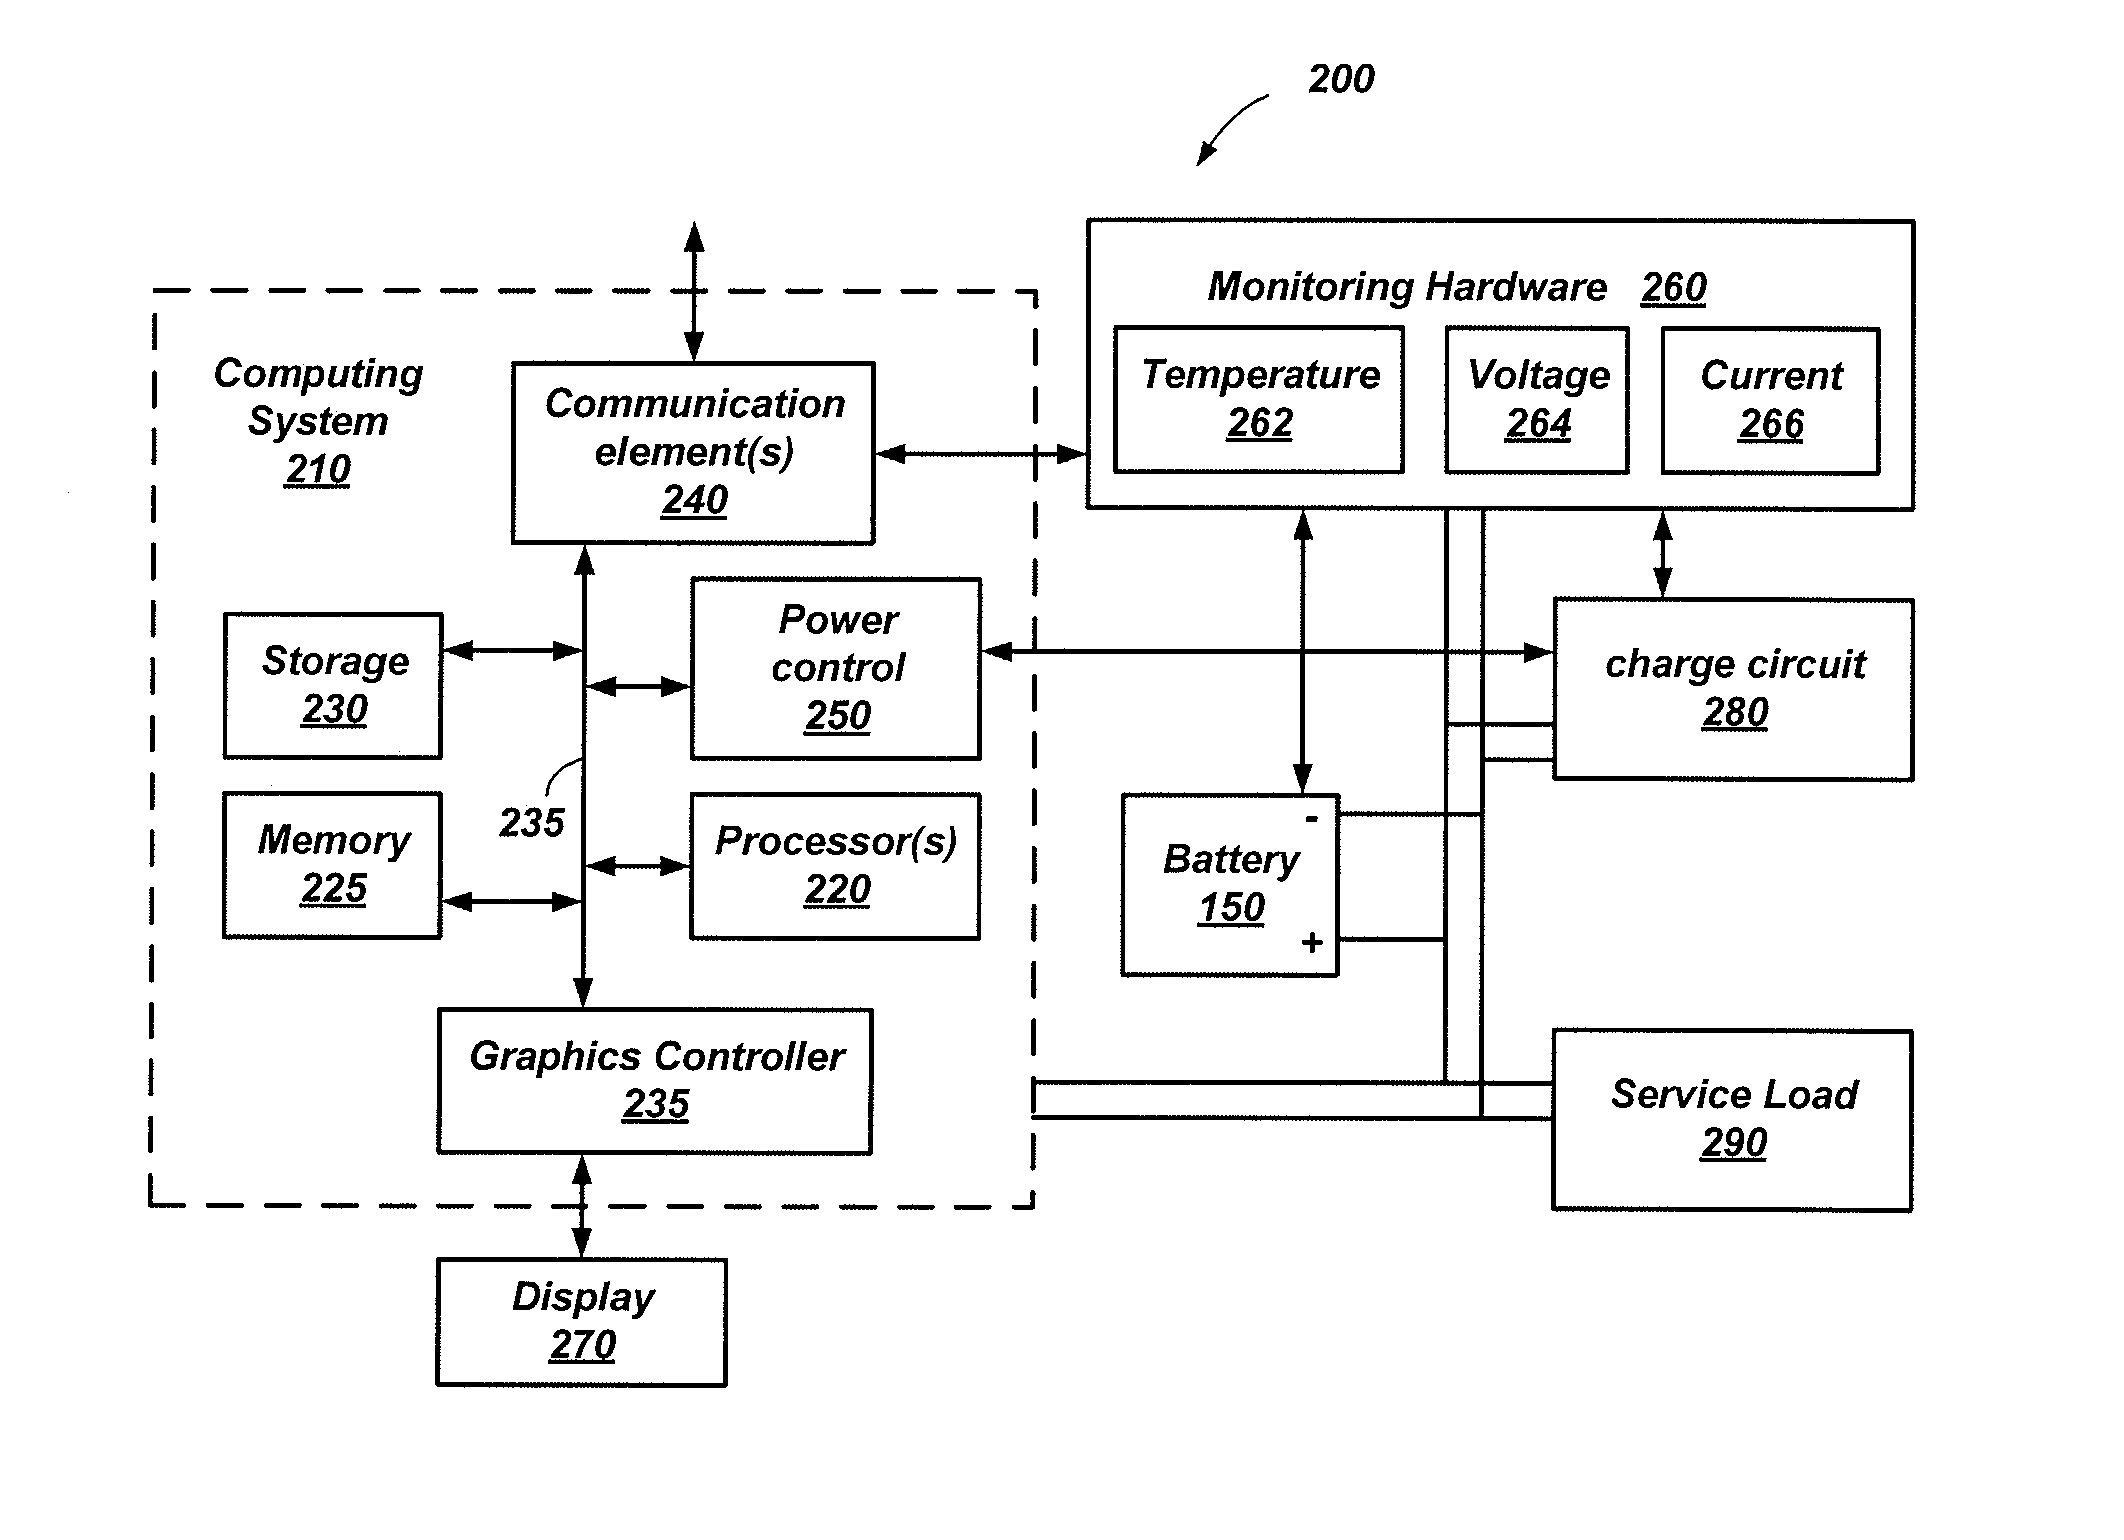 Systems, methods and computer readable media for estimating capacity loss in rechargeable electrochemical cell